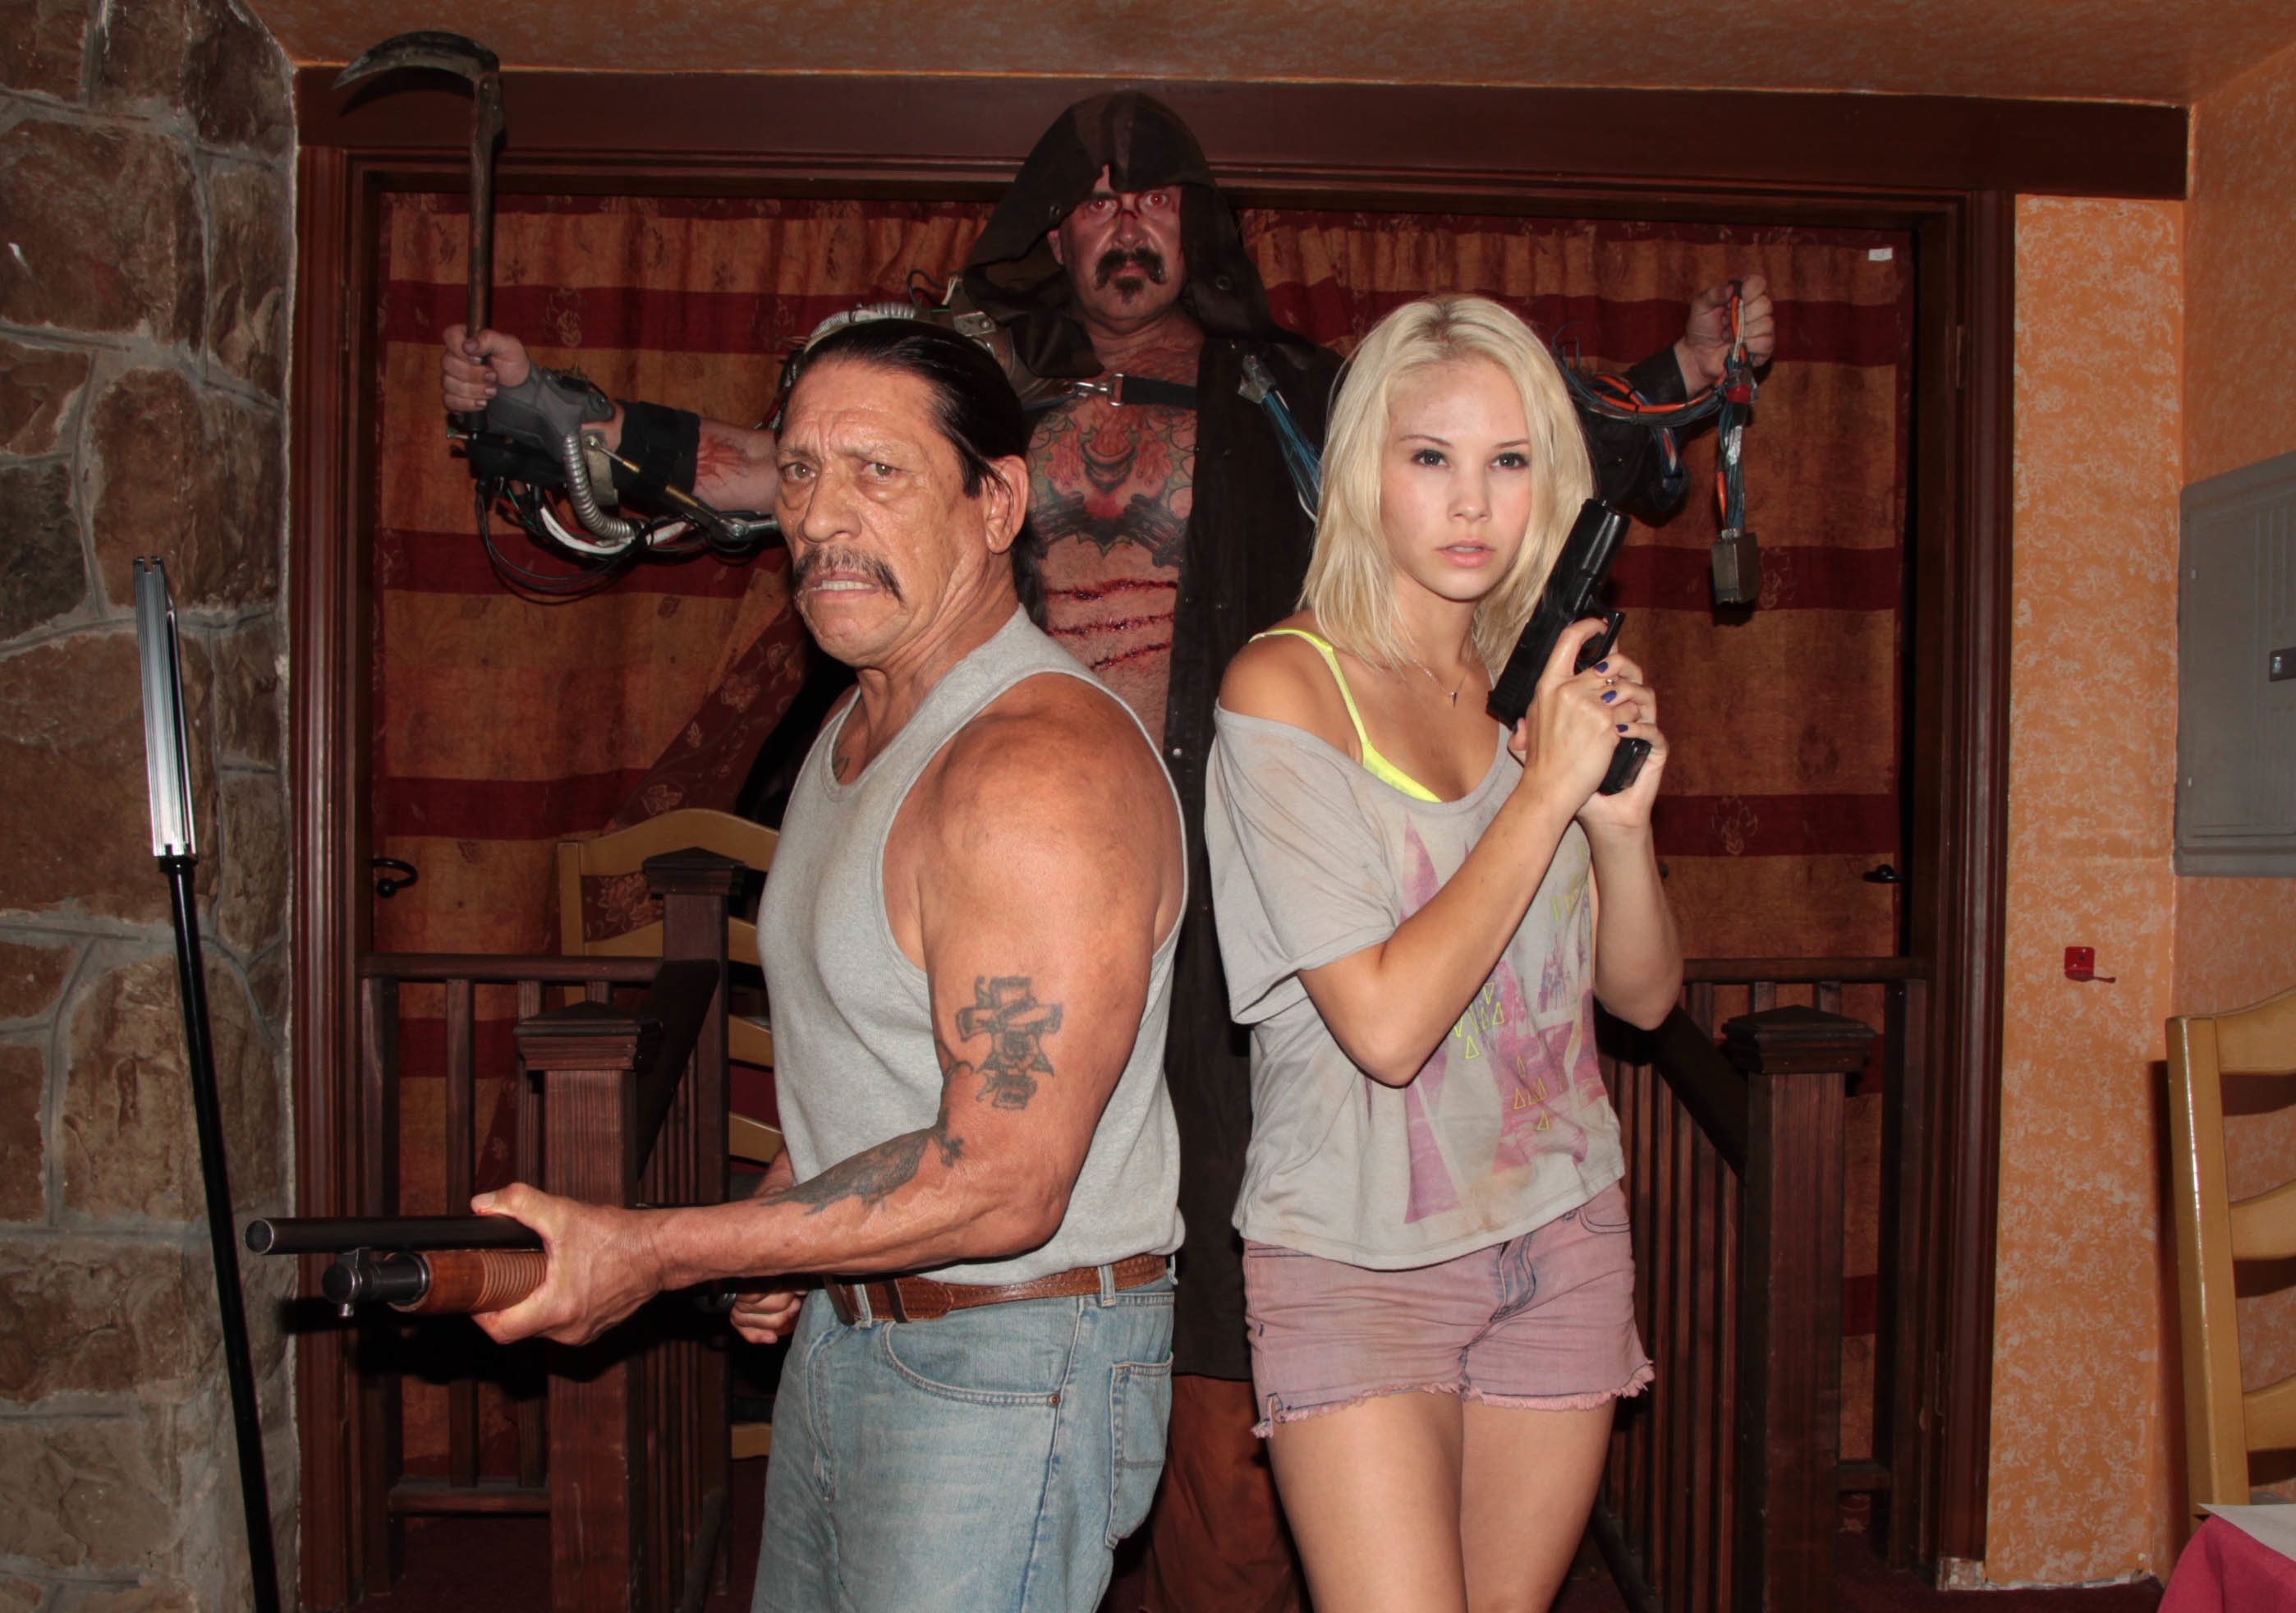 Movie Reaper. With Mike Michaels as Reaper, Danny Trejo as Jack, Shayla Beesley as Natalie.